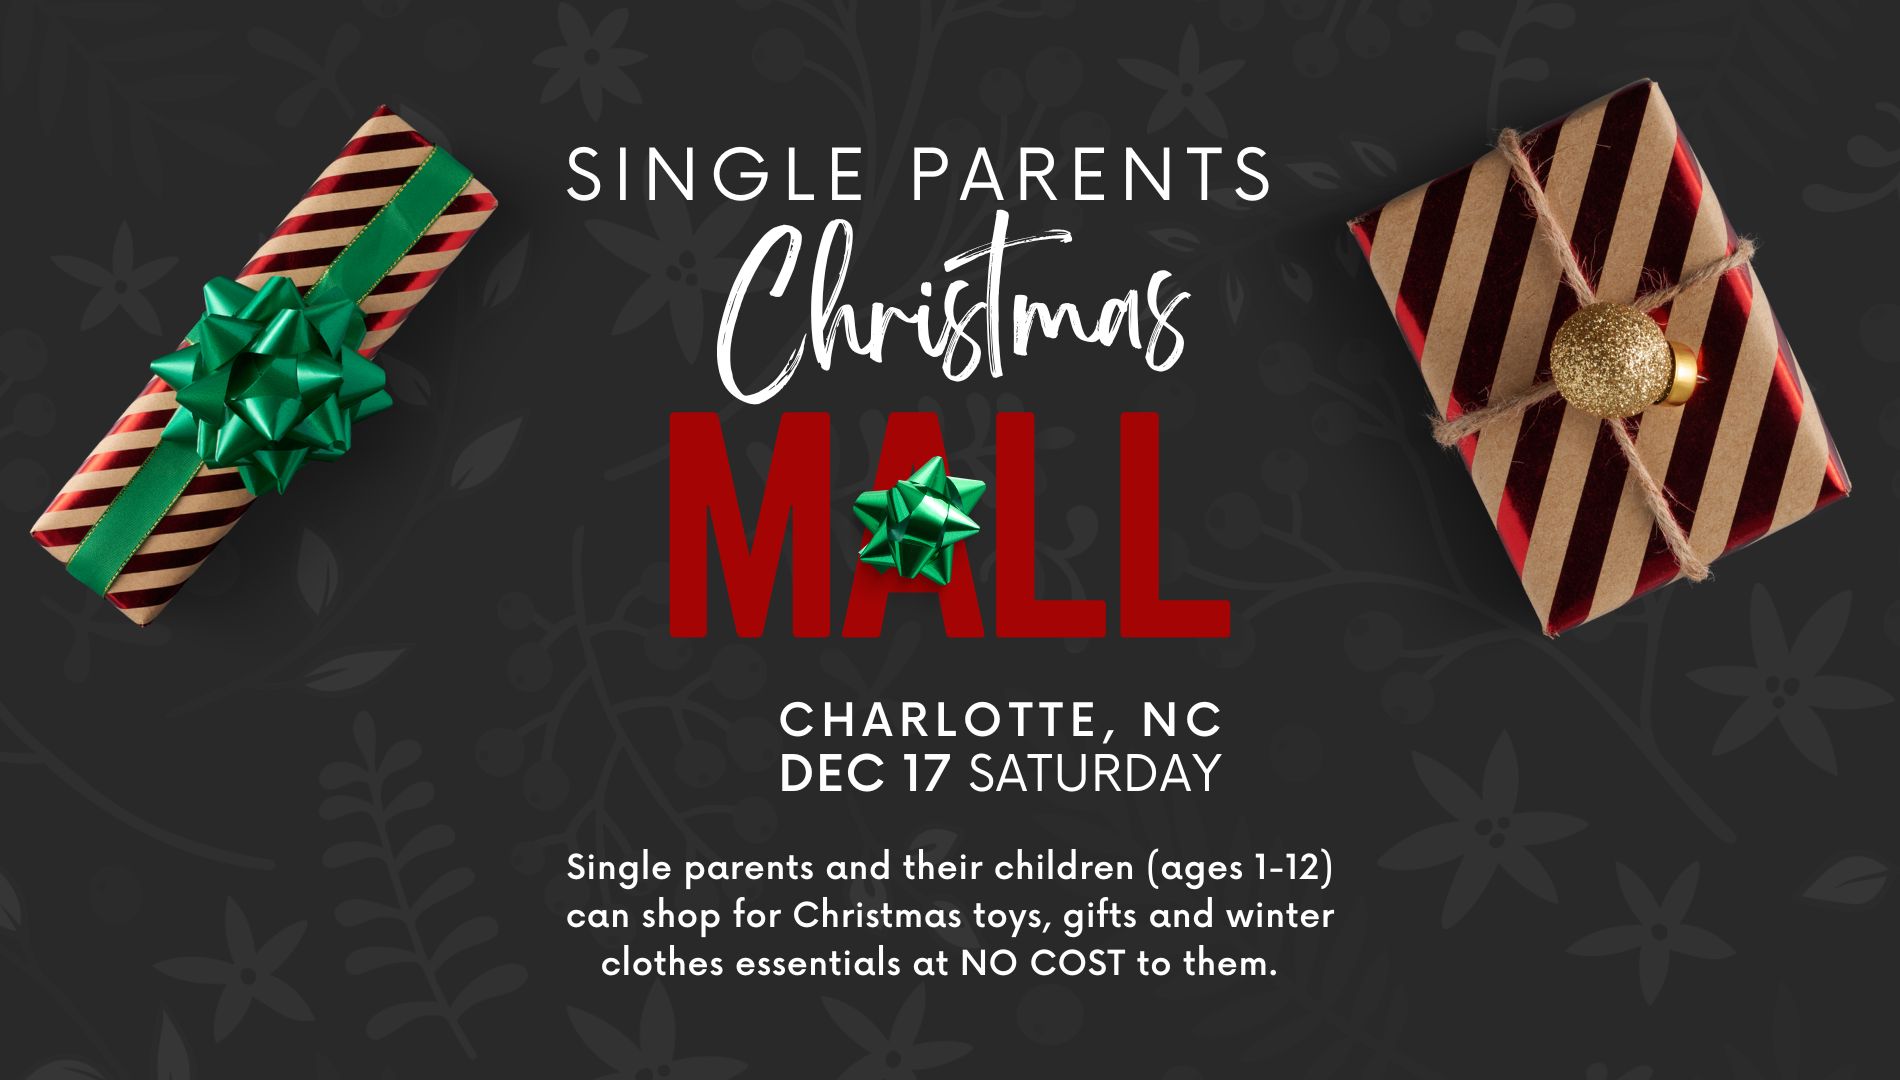 Help Support the Single Parents Christmas Mall 2022 at The Restoration Place Church North Carolina